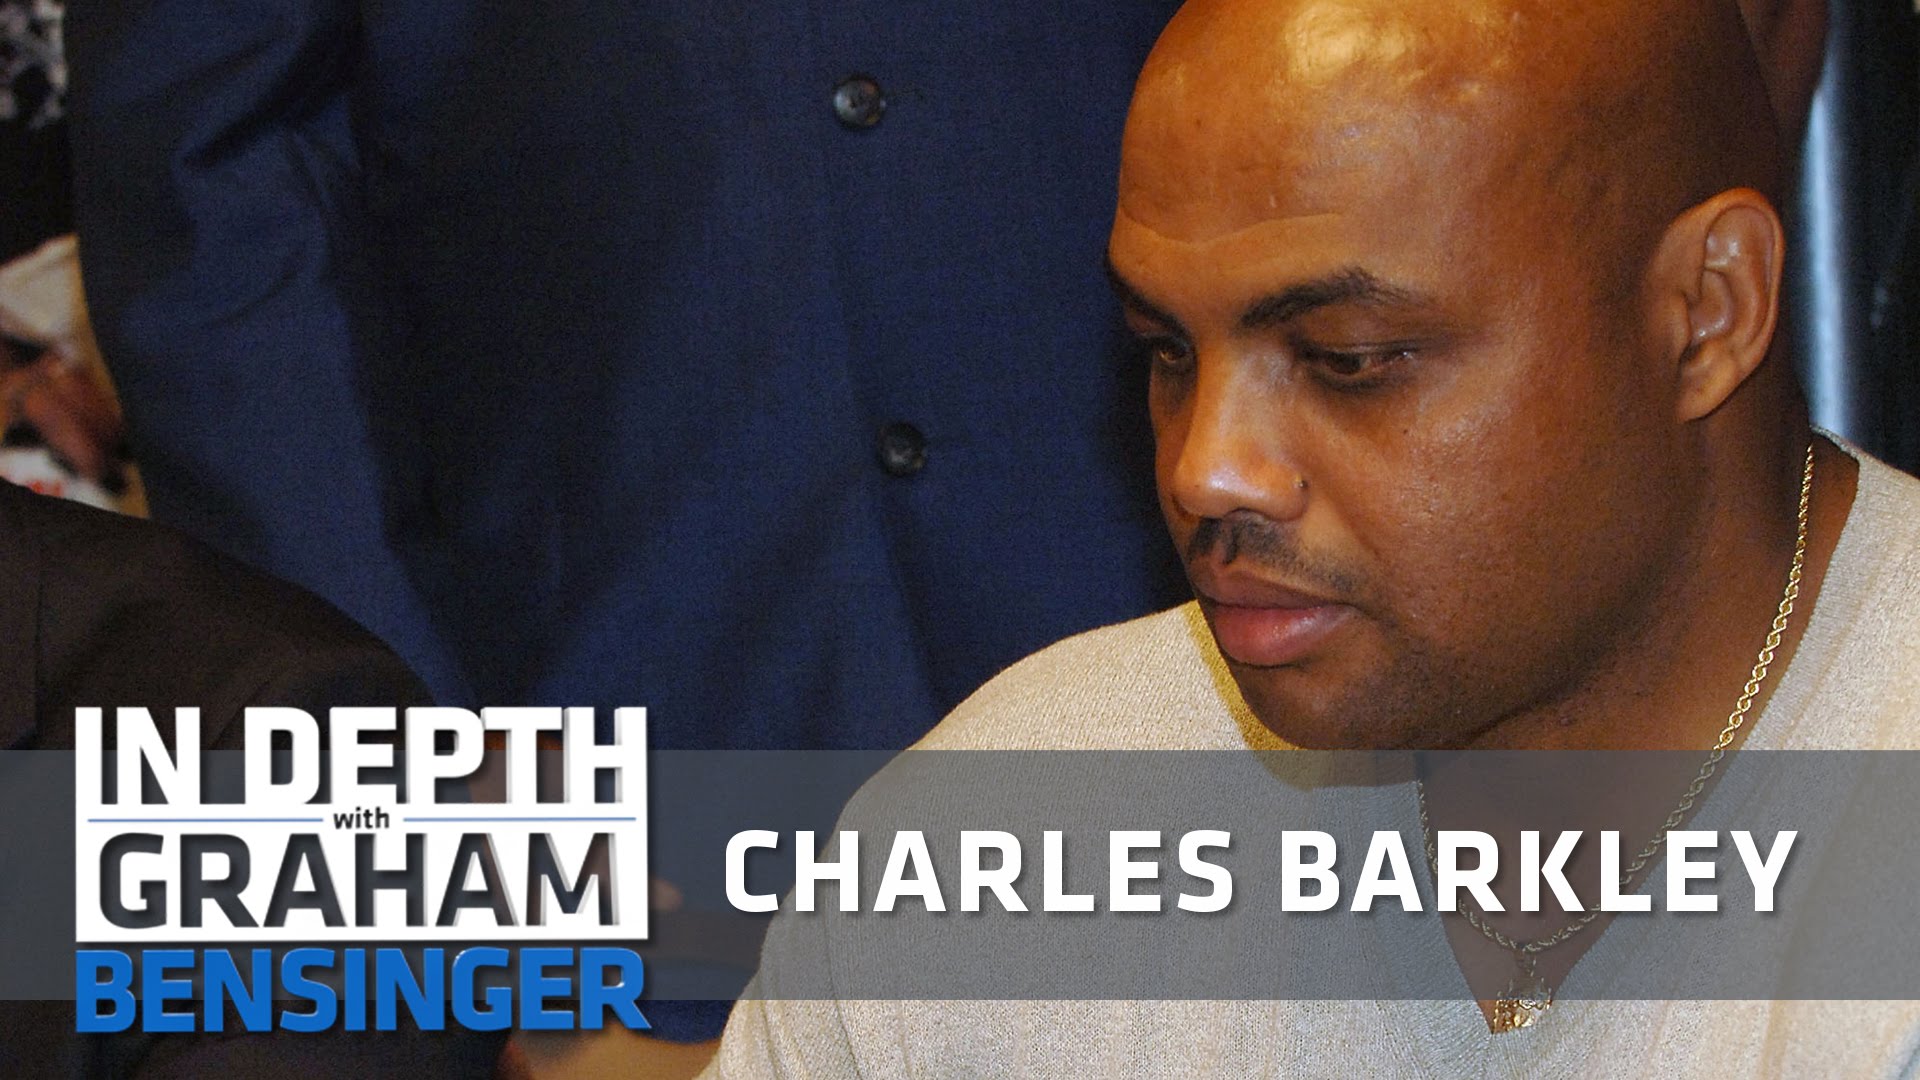 Charles Barkley says he's lost $1 million 10-20 times gambling